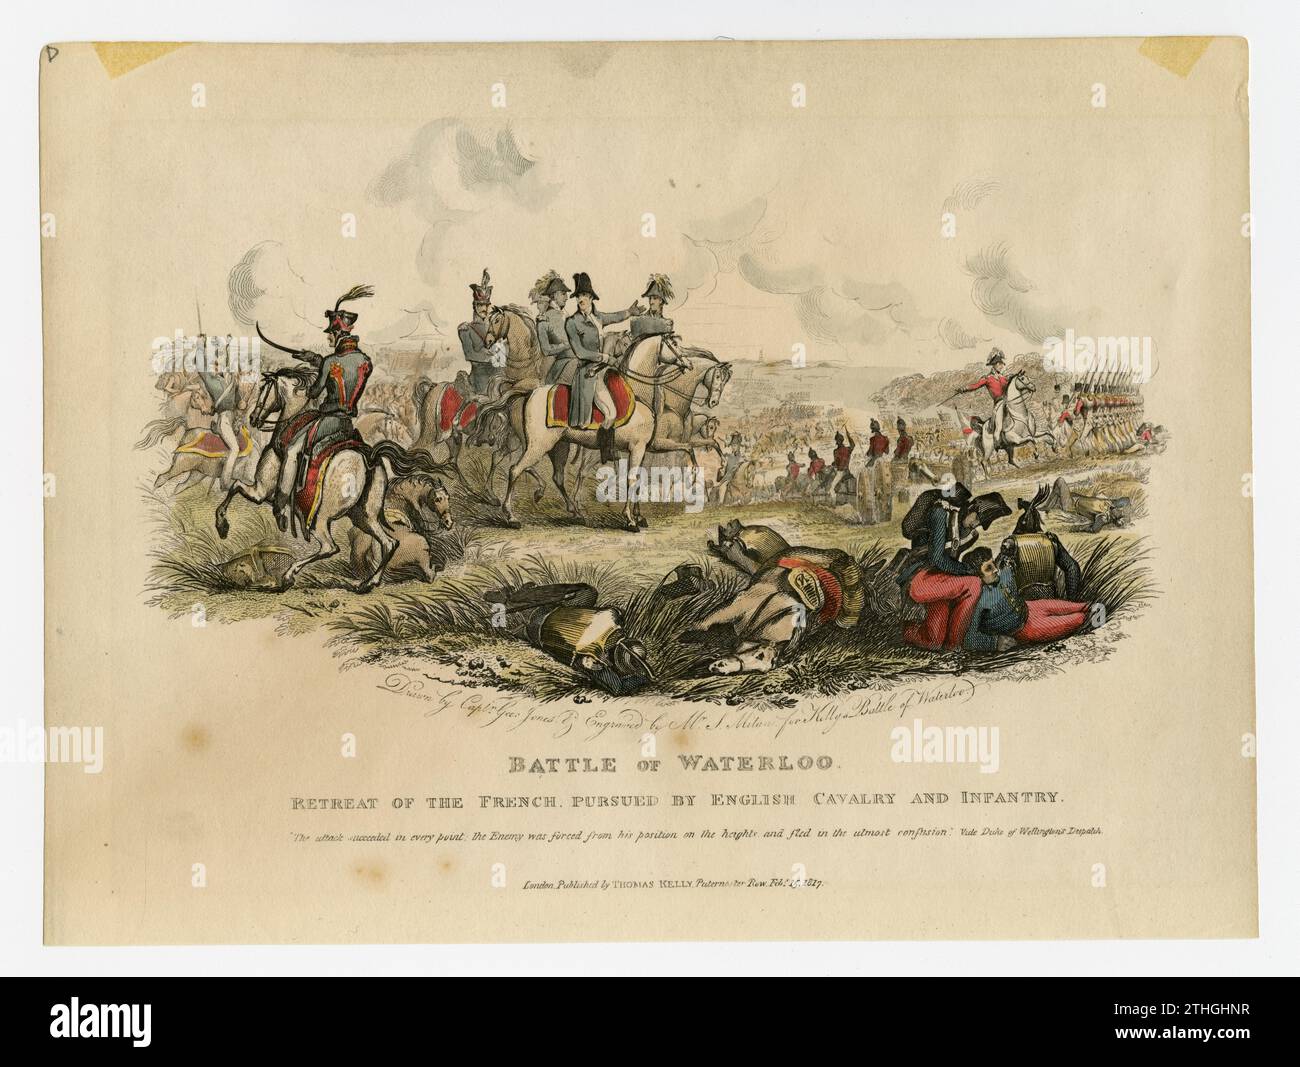 Battle of Waterloo - retreat of the French, pursued by English cavalry and infantry. Stock Photo